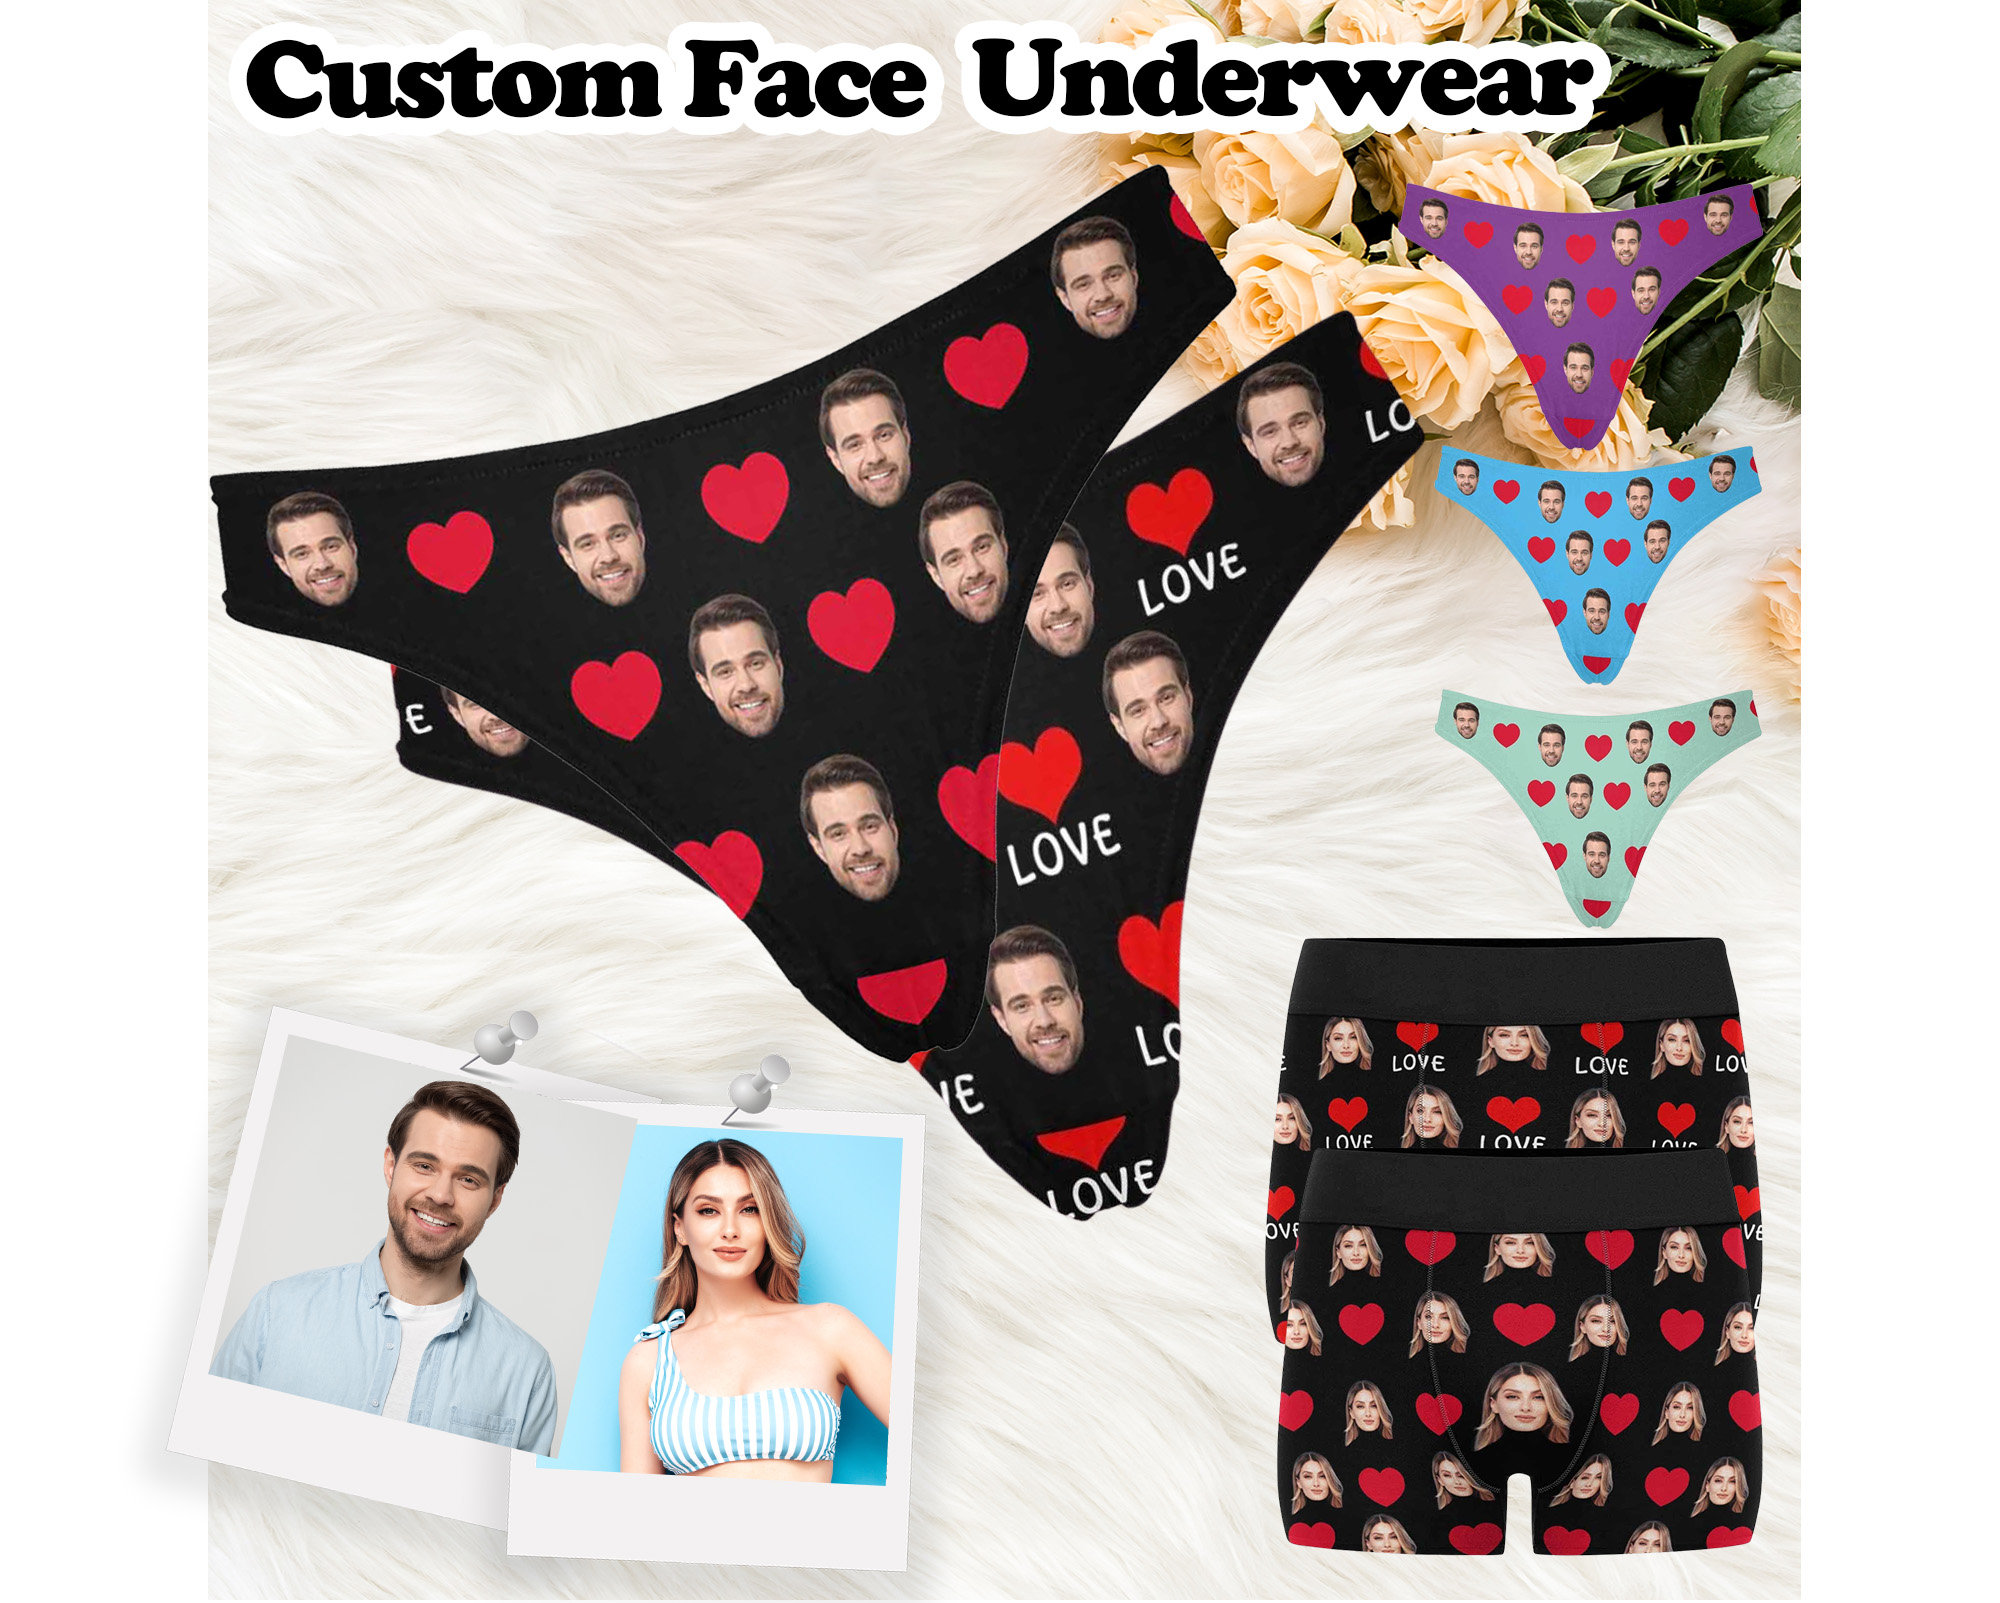 Customizable Play with me Thongs (Black) Add Name or Phrase on the Back